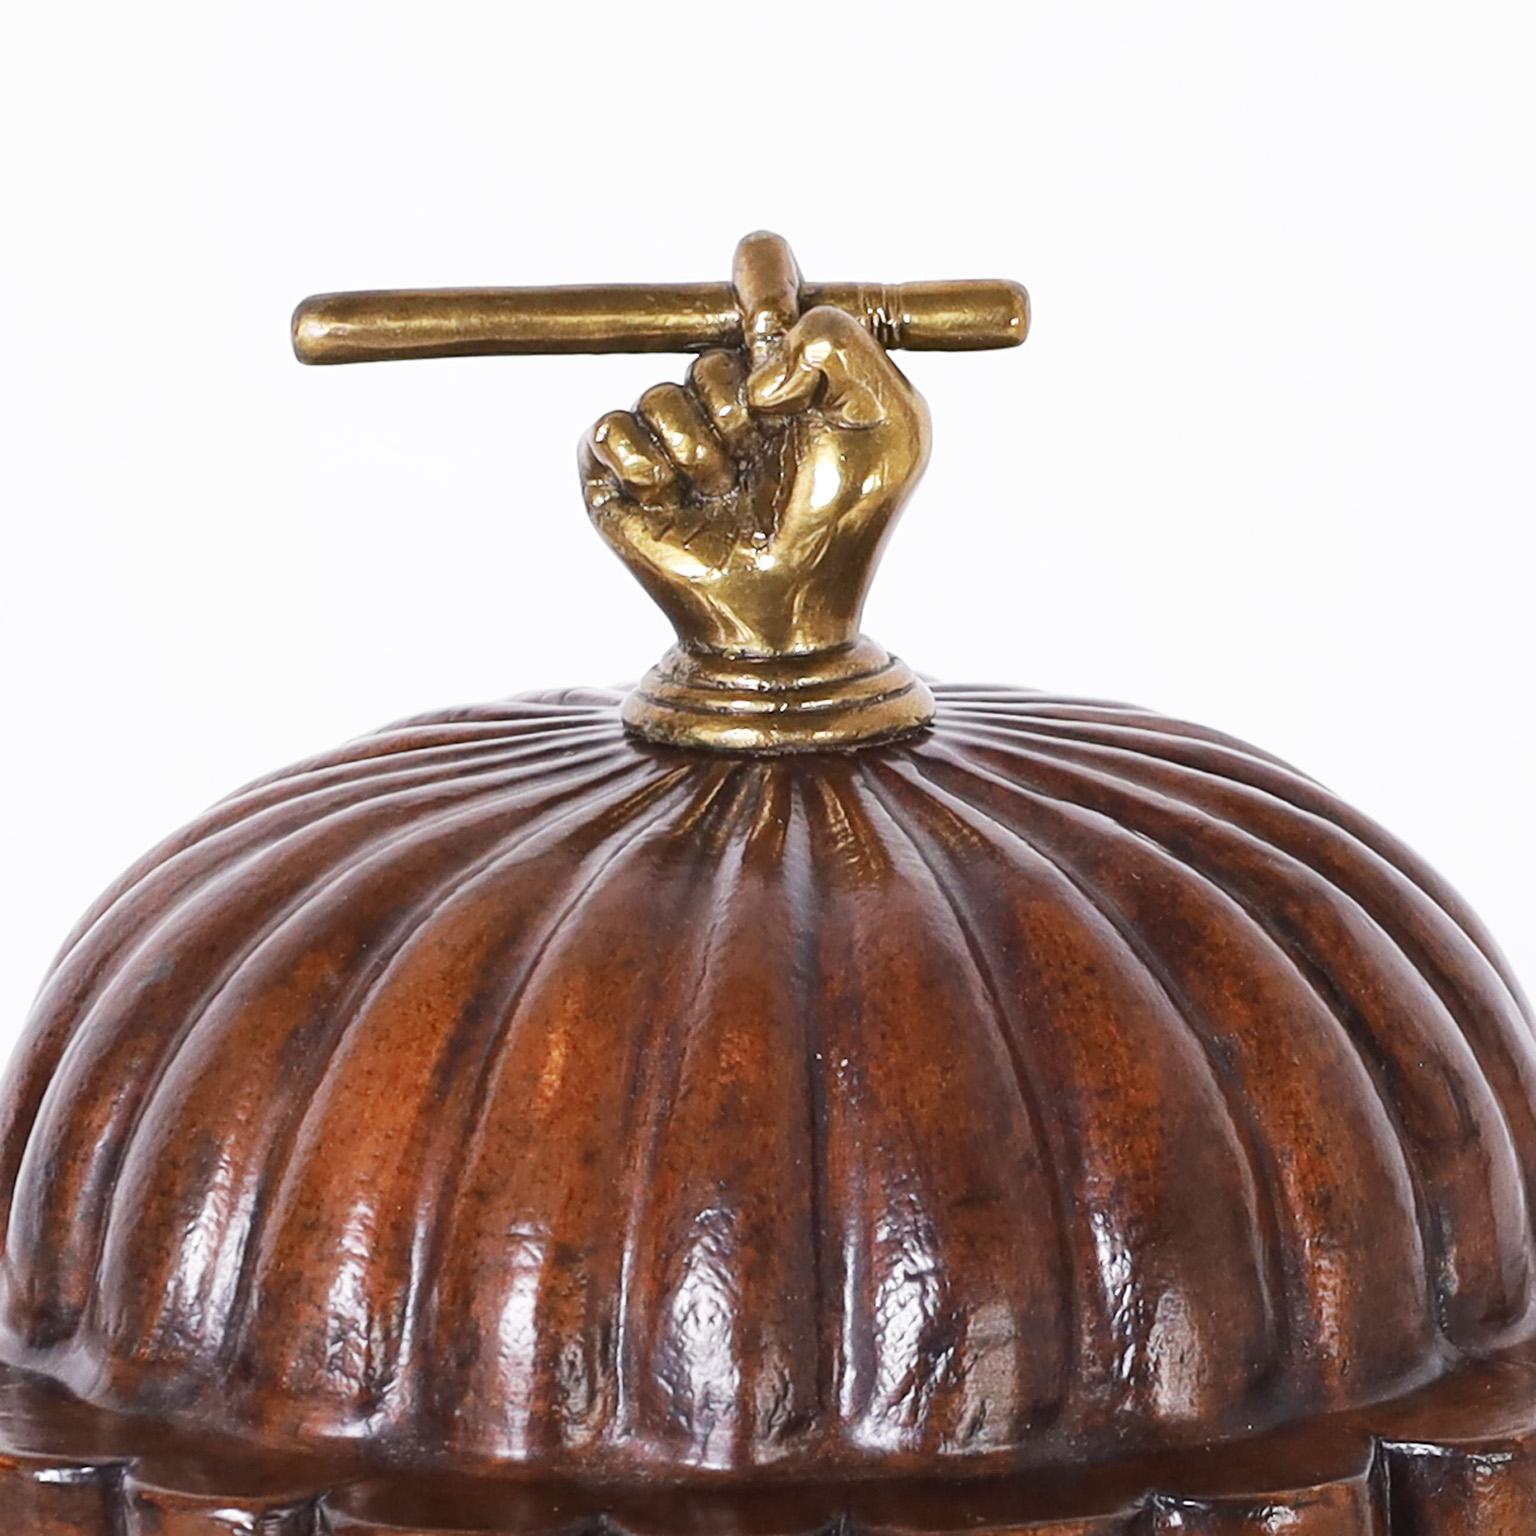 Whimsical midcentury lidded cigar box crafted in cedar and featuring a brass lid handle depicting a cigar in hand, hand painted labels over a tobacco colored finish, and brass tobacco leaf feet.